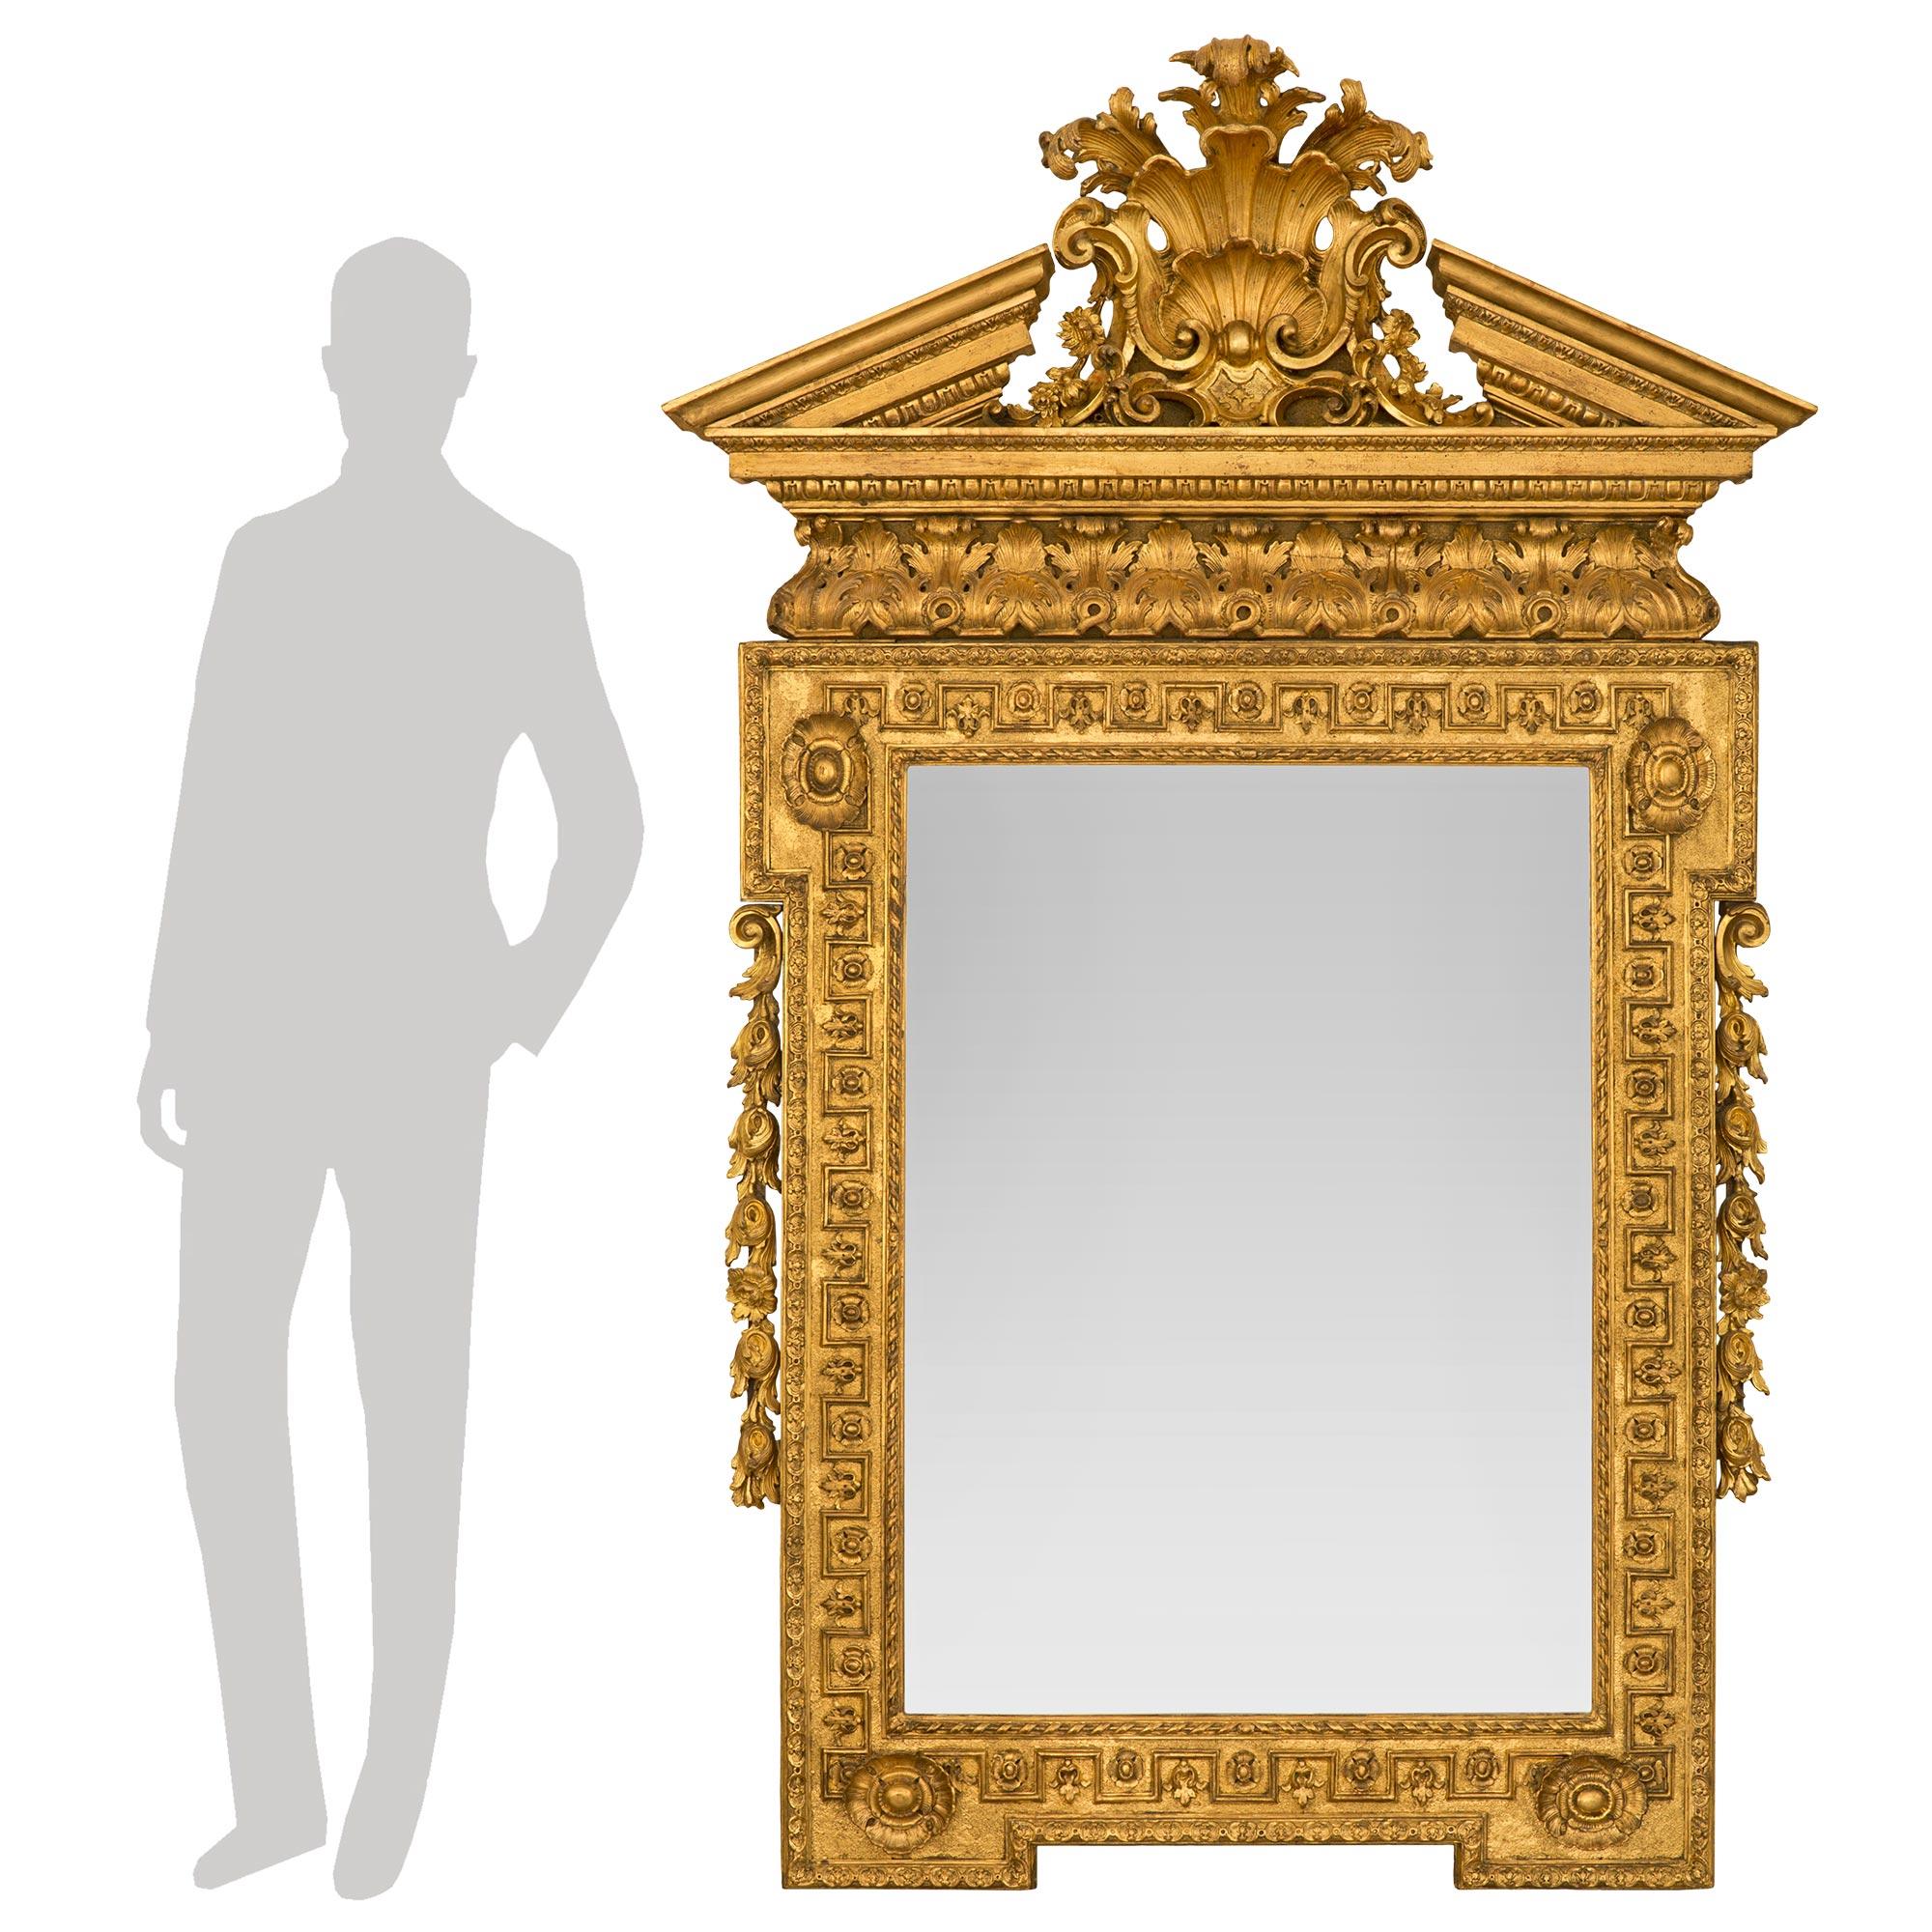 A sensational and large scale English early 19th century George I st. giltwood mirror circa 1820. The mirror retains its original mirror plate set within a stunning and most decorative frame with a fine twisted ribbon band and superb wrap around